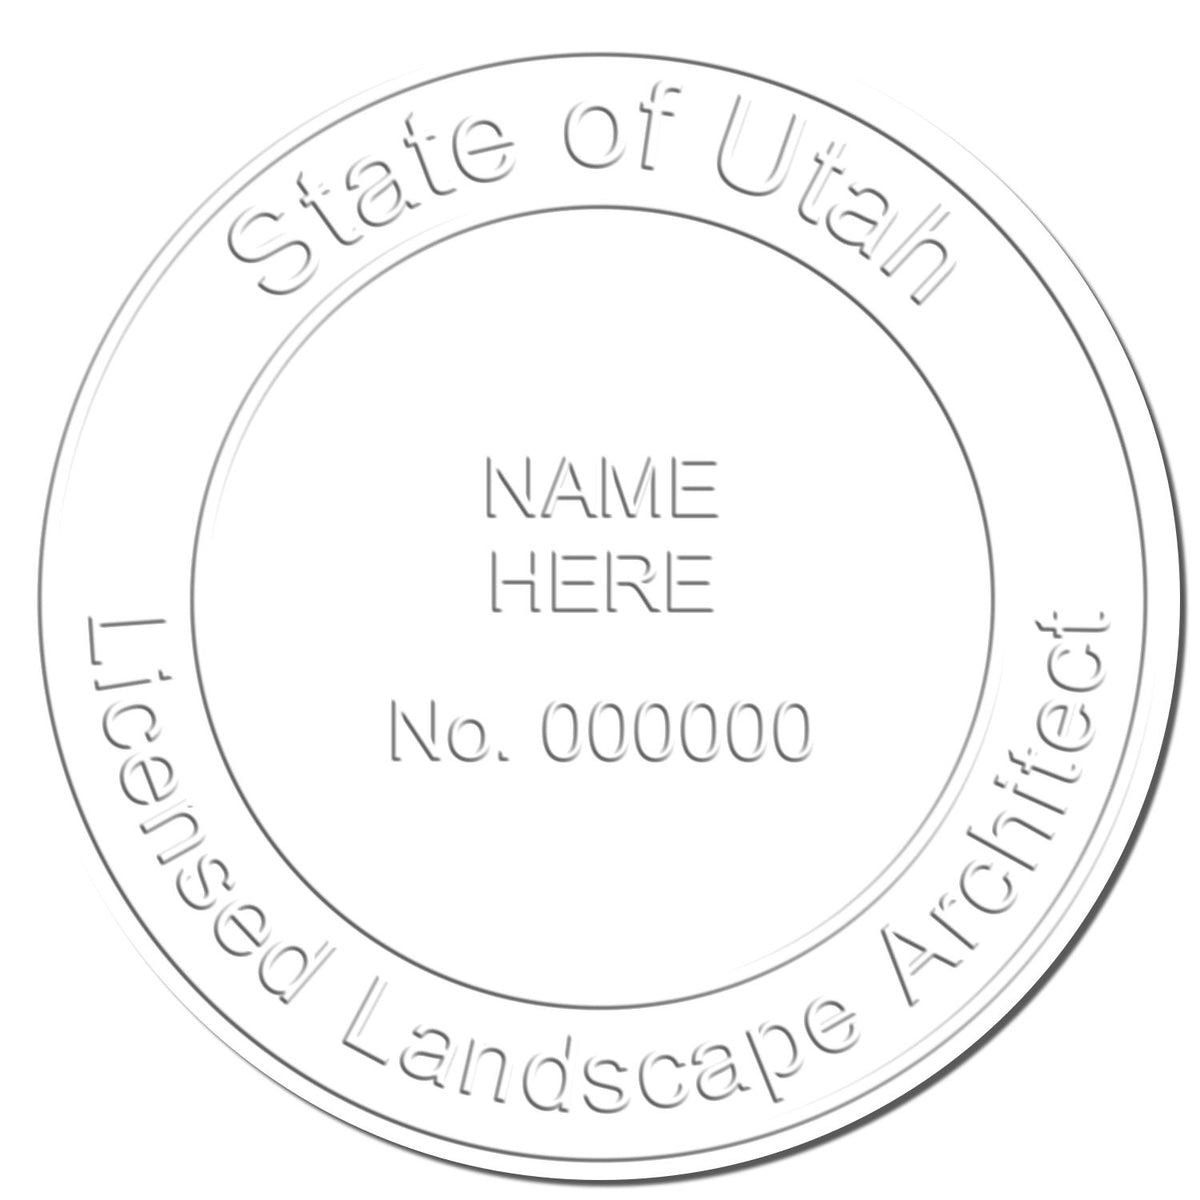 This paper is stamped with a sample imprint of the Gift Utah Landscape Architect Seal, signifying its quality and reliability.